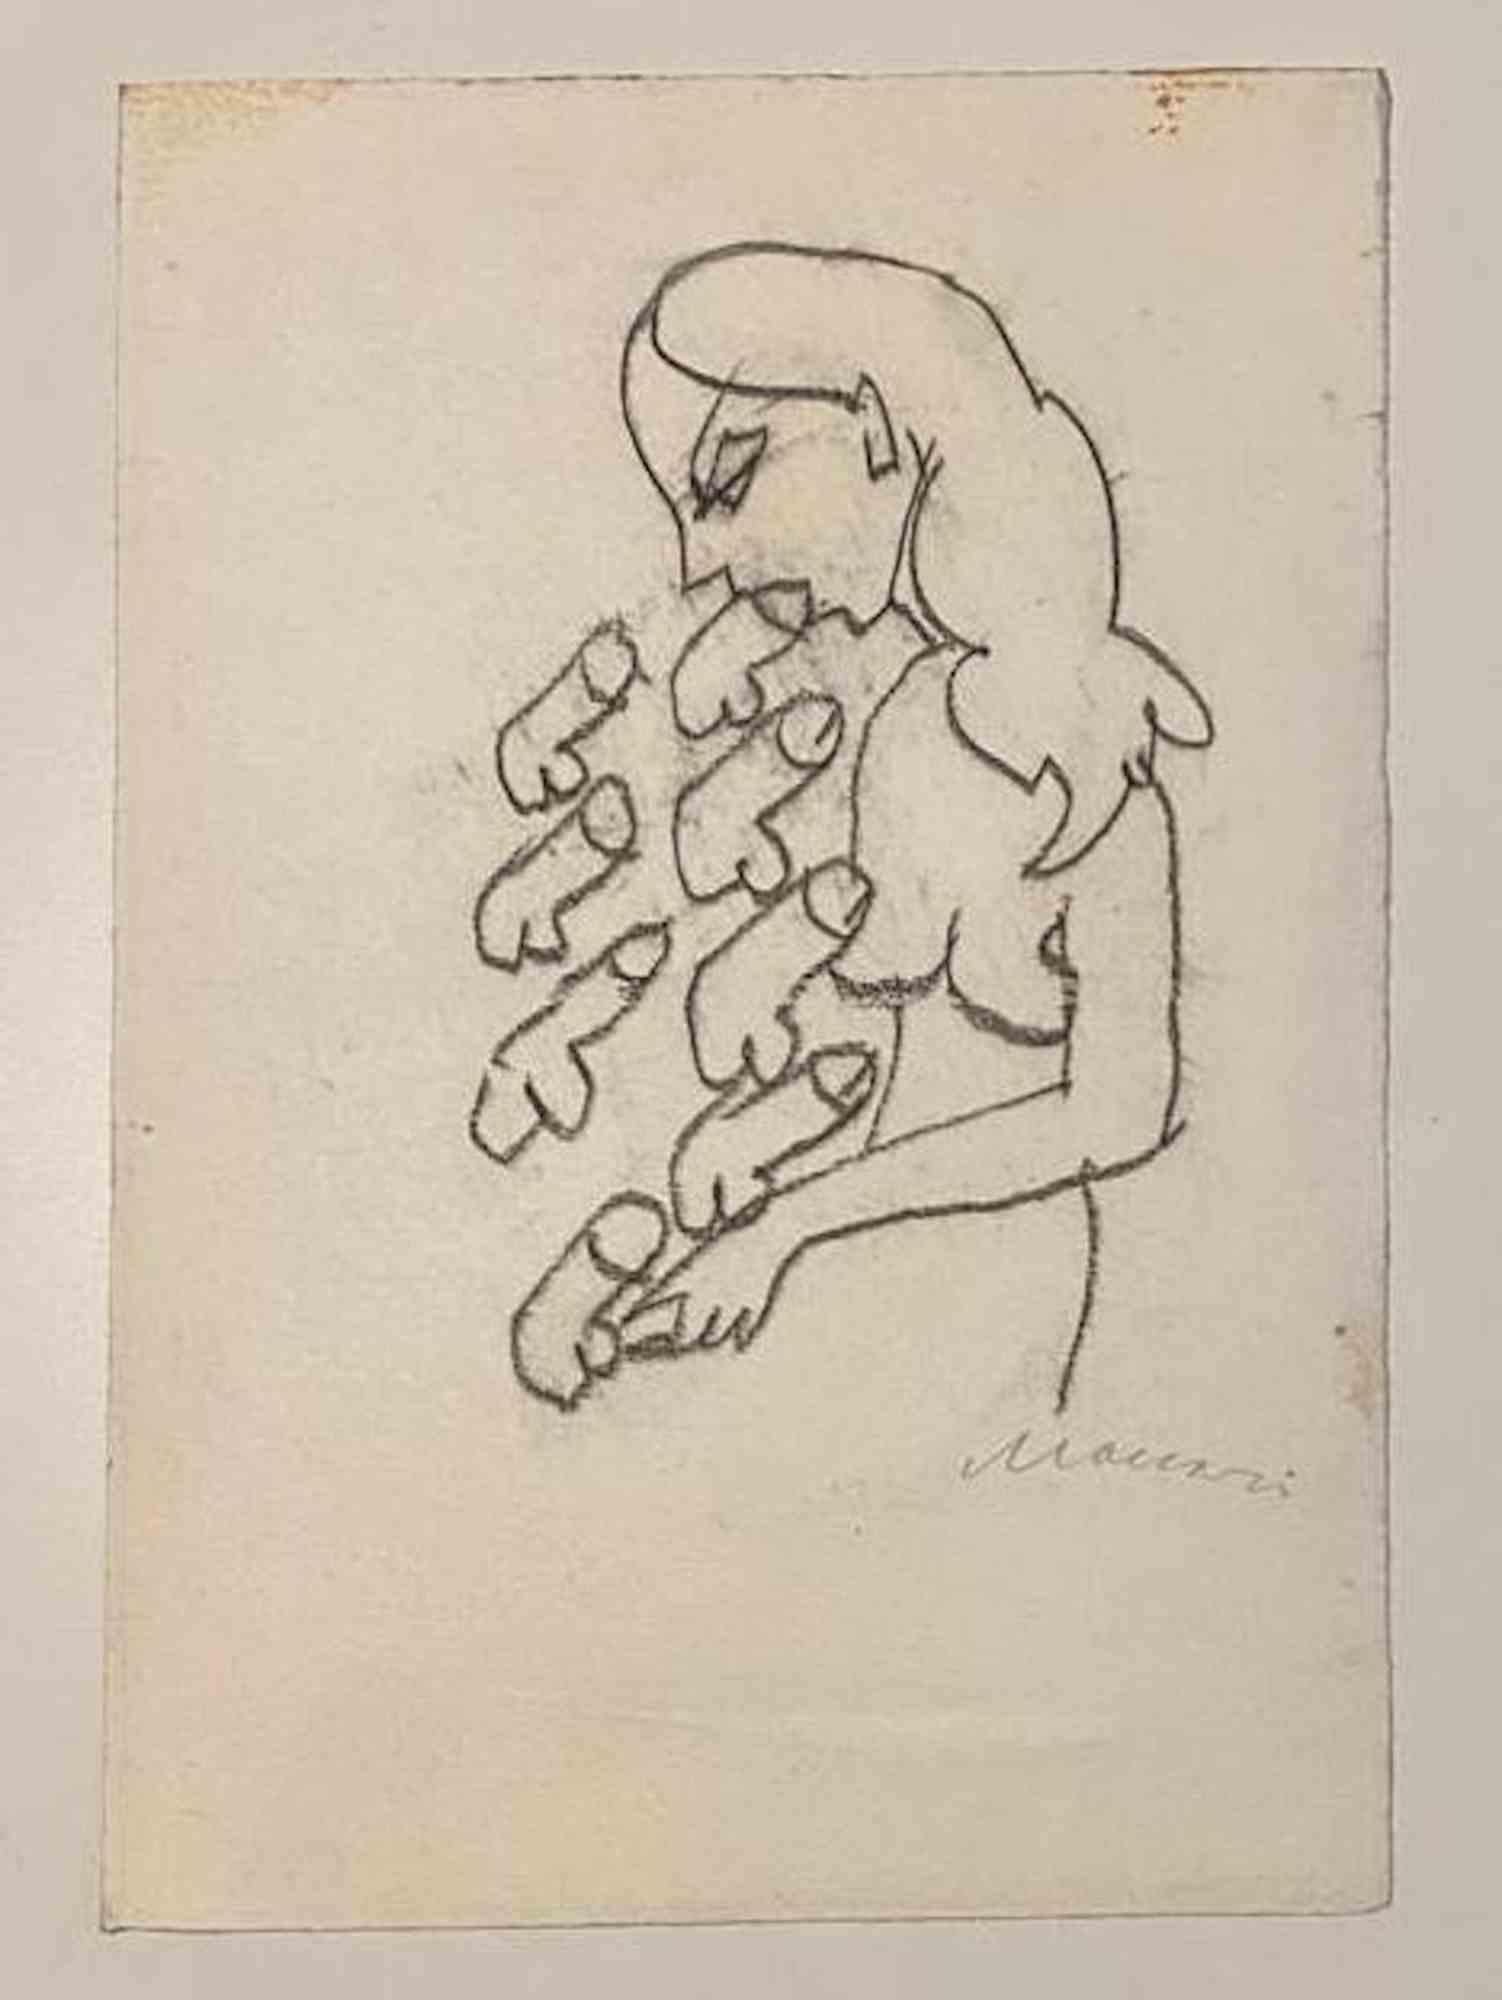 Multiple Opportunities is a pencil Drawing realized by Mino Maccari  (1924-1989) in the Mid-20th Century.

Hand-signed on the lower.

Good conditions.

Mino Maccari (Siena, 1924-Rome, June 16, 1989) was an Italian writer, painter, engraver and